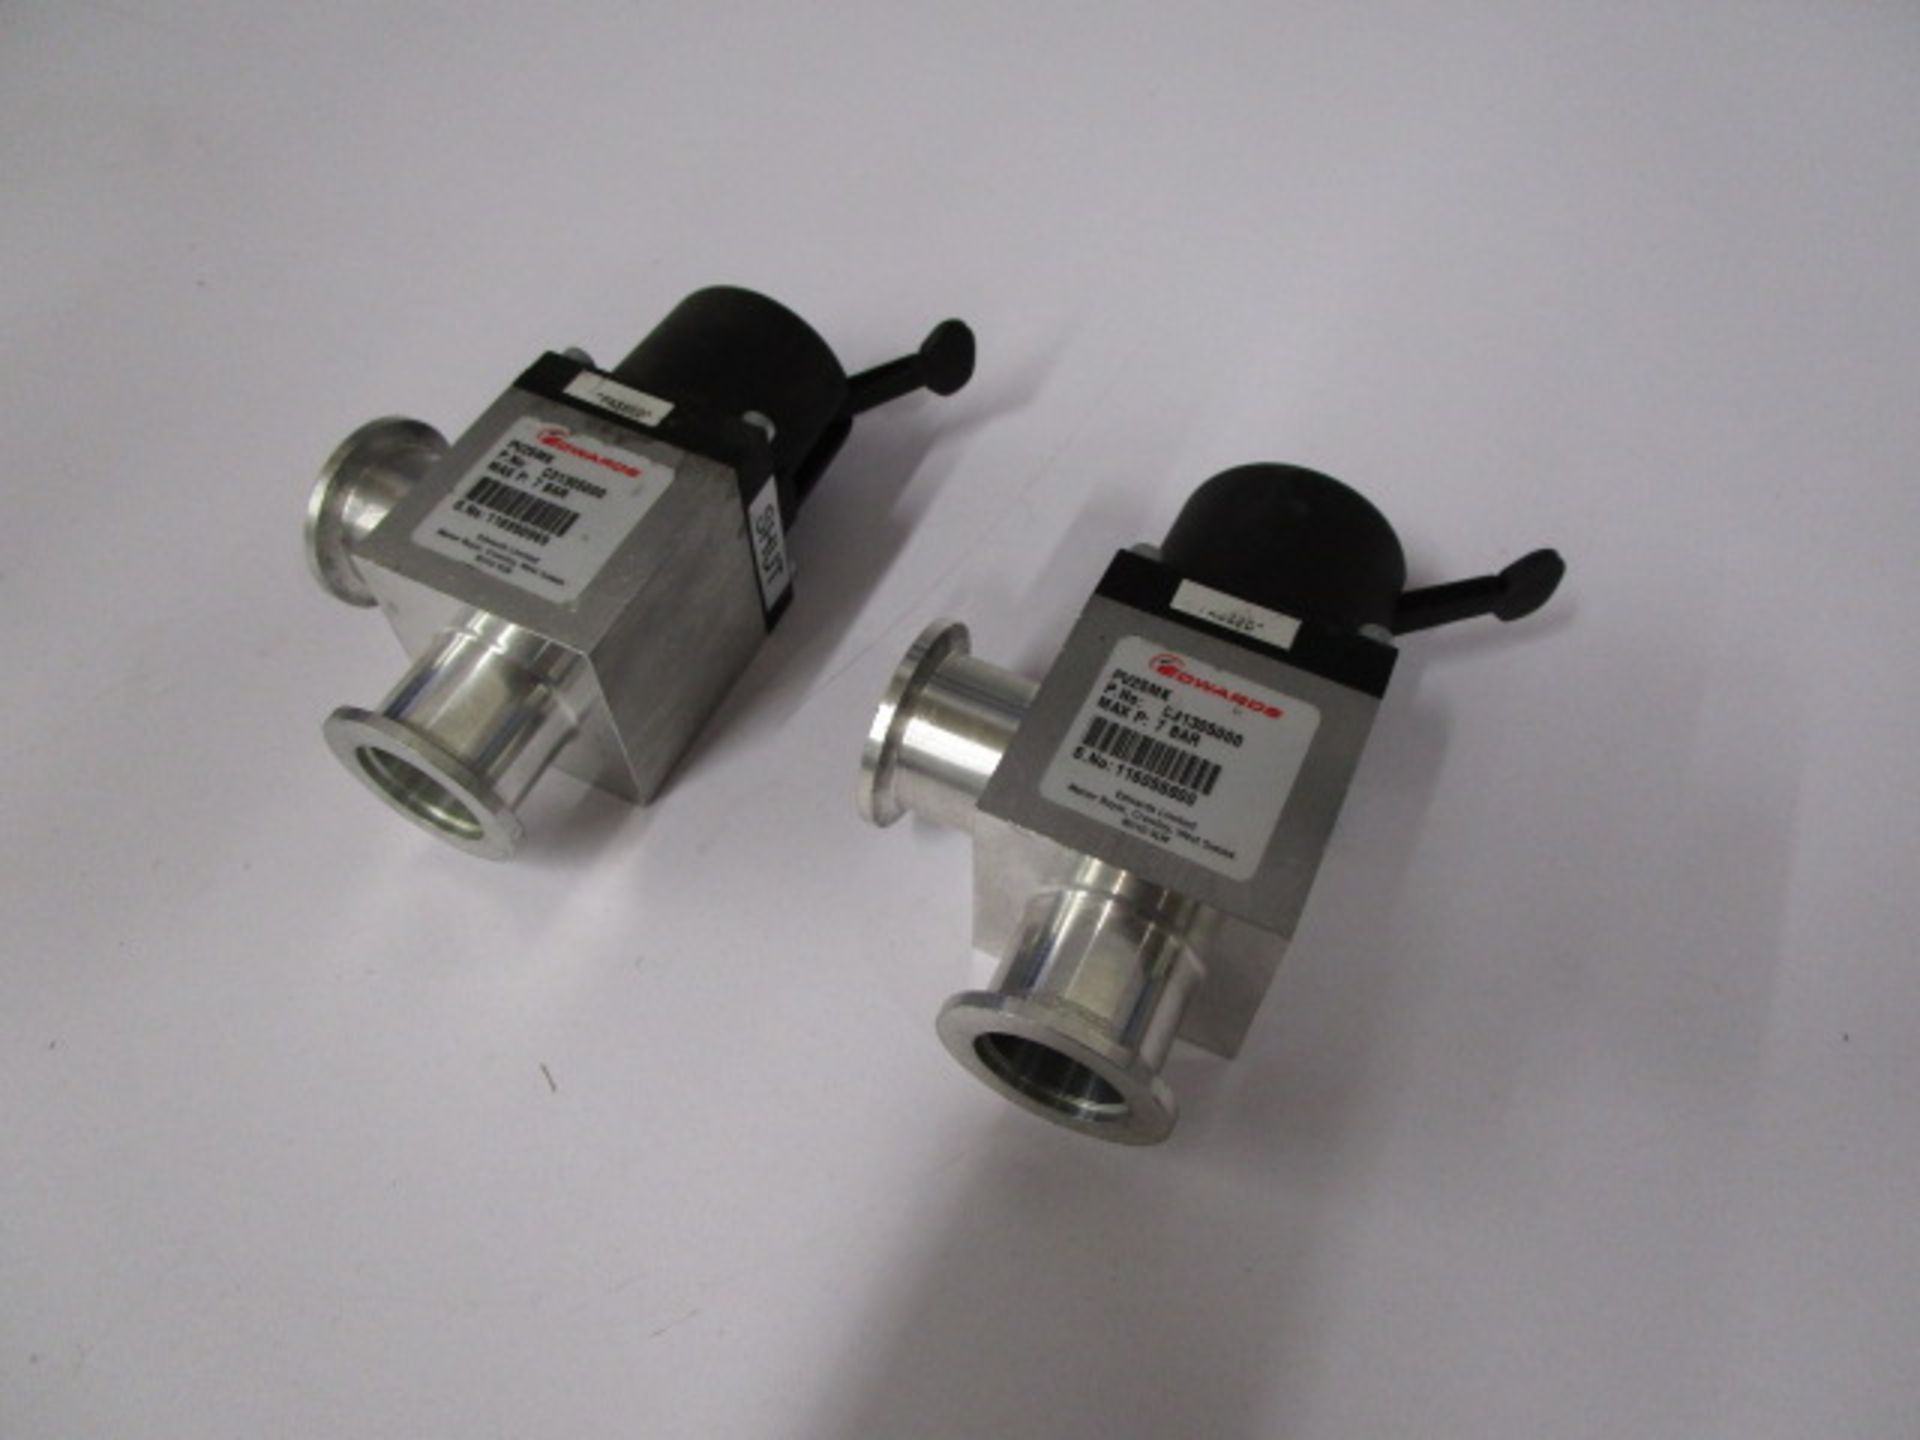 QUANTITY OF 2 EDWARDS PV25MK RIGHT ANGLE PIPELINE ISOLATION VALVE - Image 5 of 5